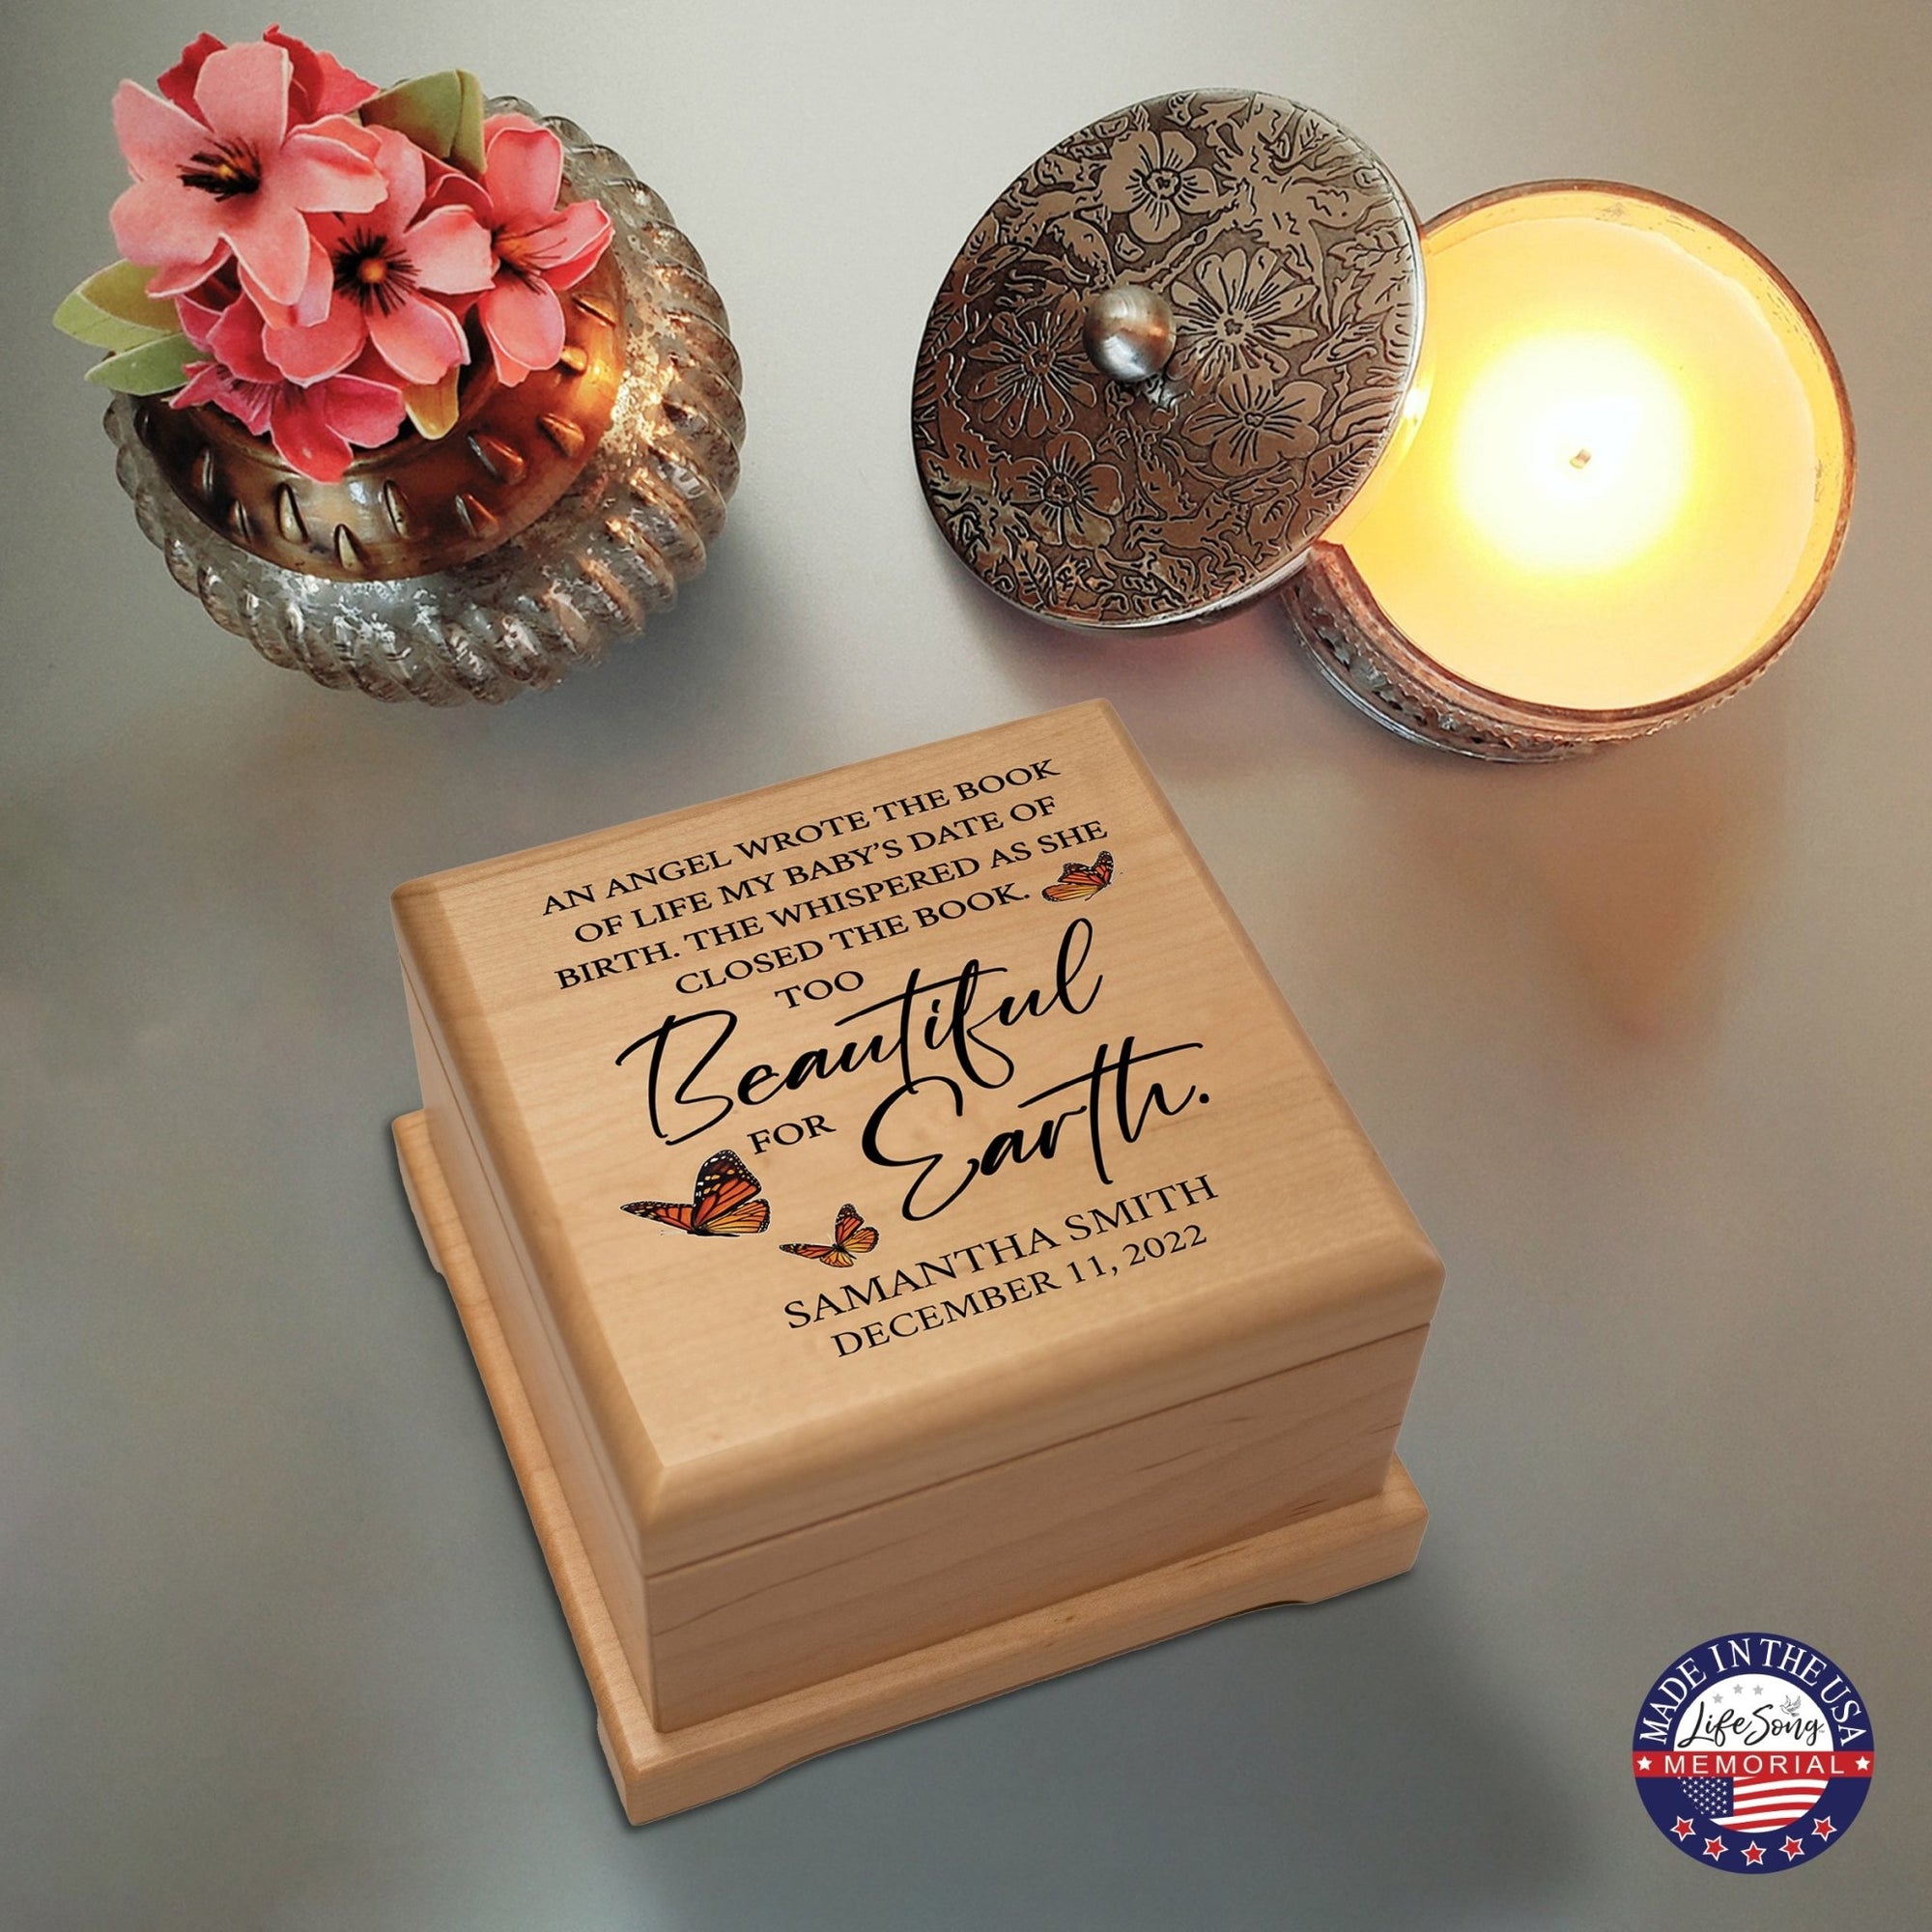 Custom Memorial Keepsake Urn Box for Human Ashes - An Angel In The Book of Life - LifeSong Milestones